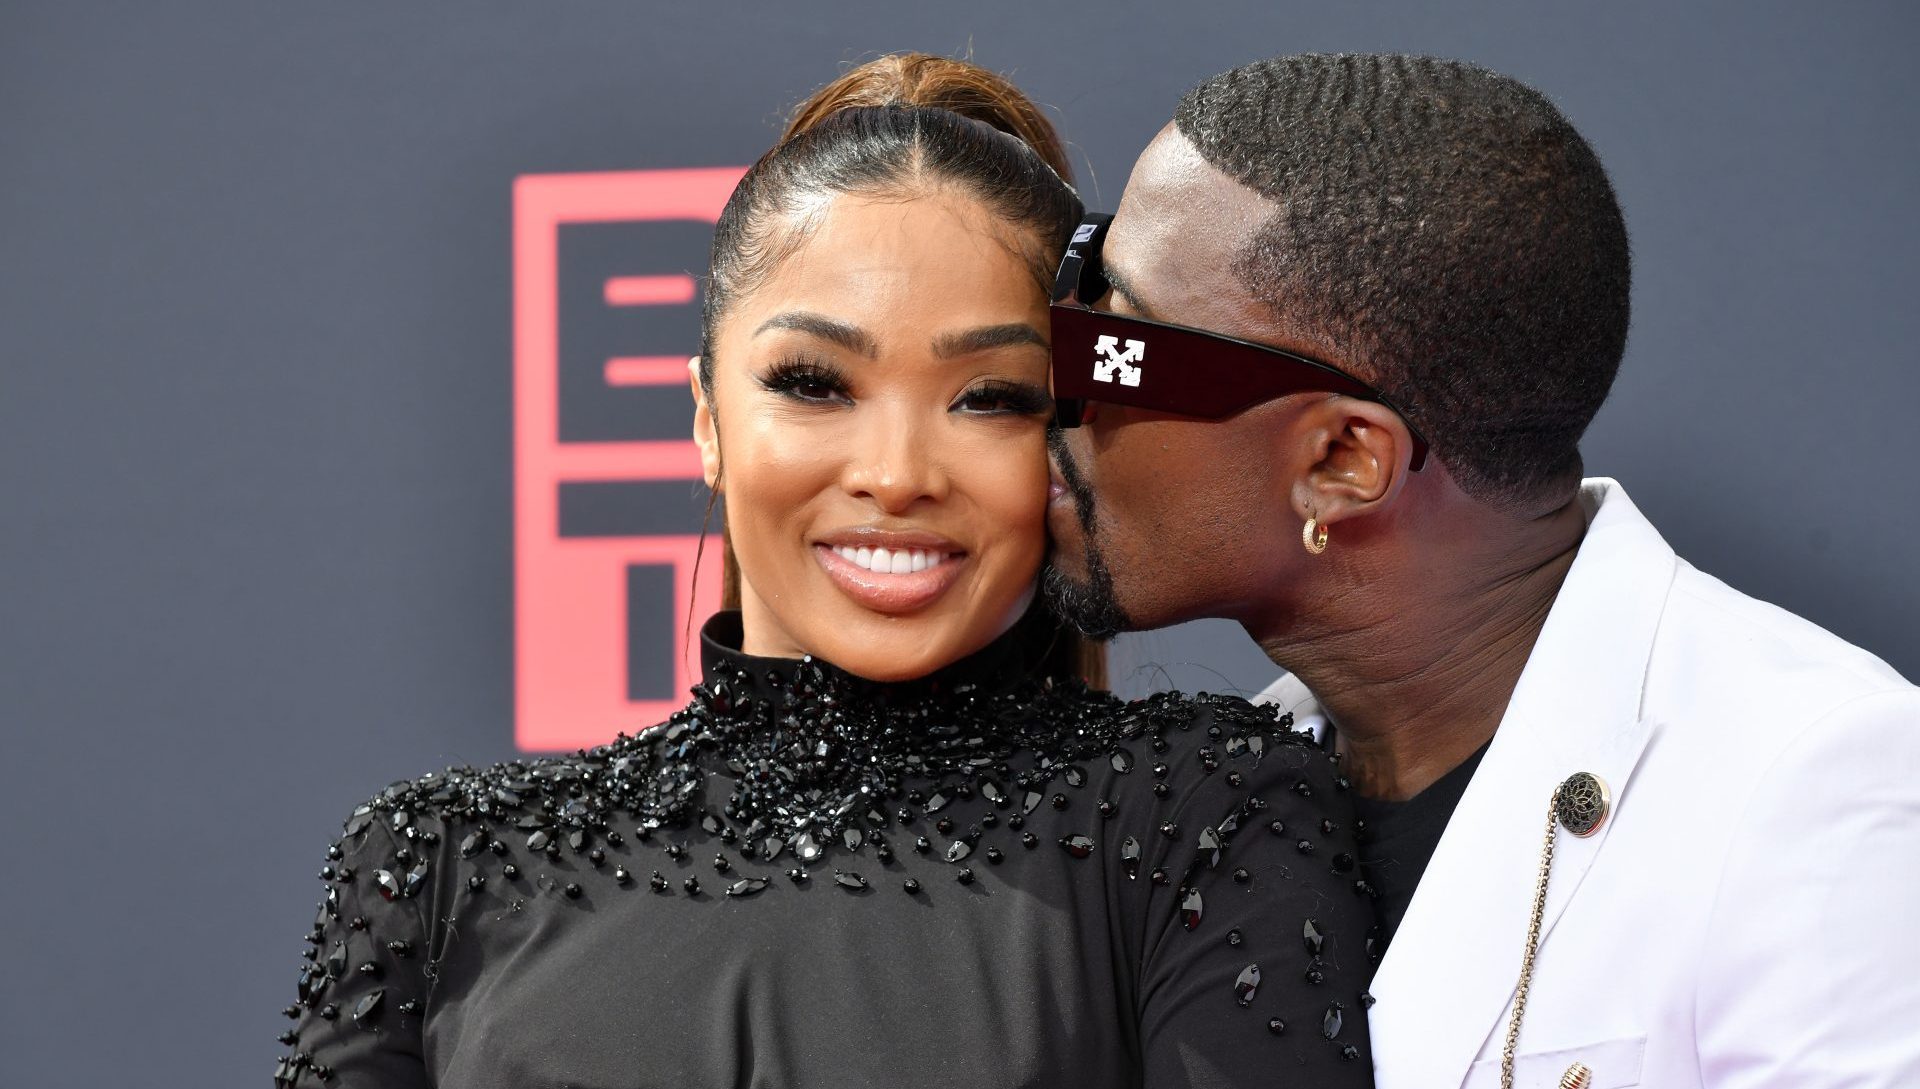 WATCH: Ray J Hints At Reconciliation With Princess Love: 'Had To Get My Wife Back And Start Fresh'